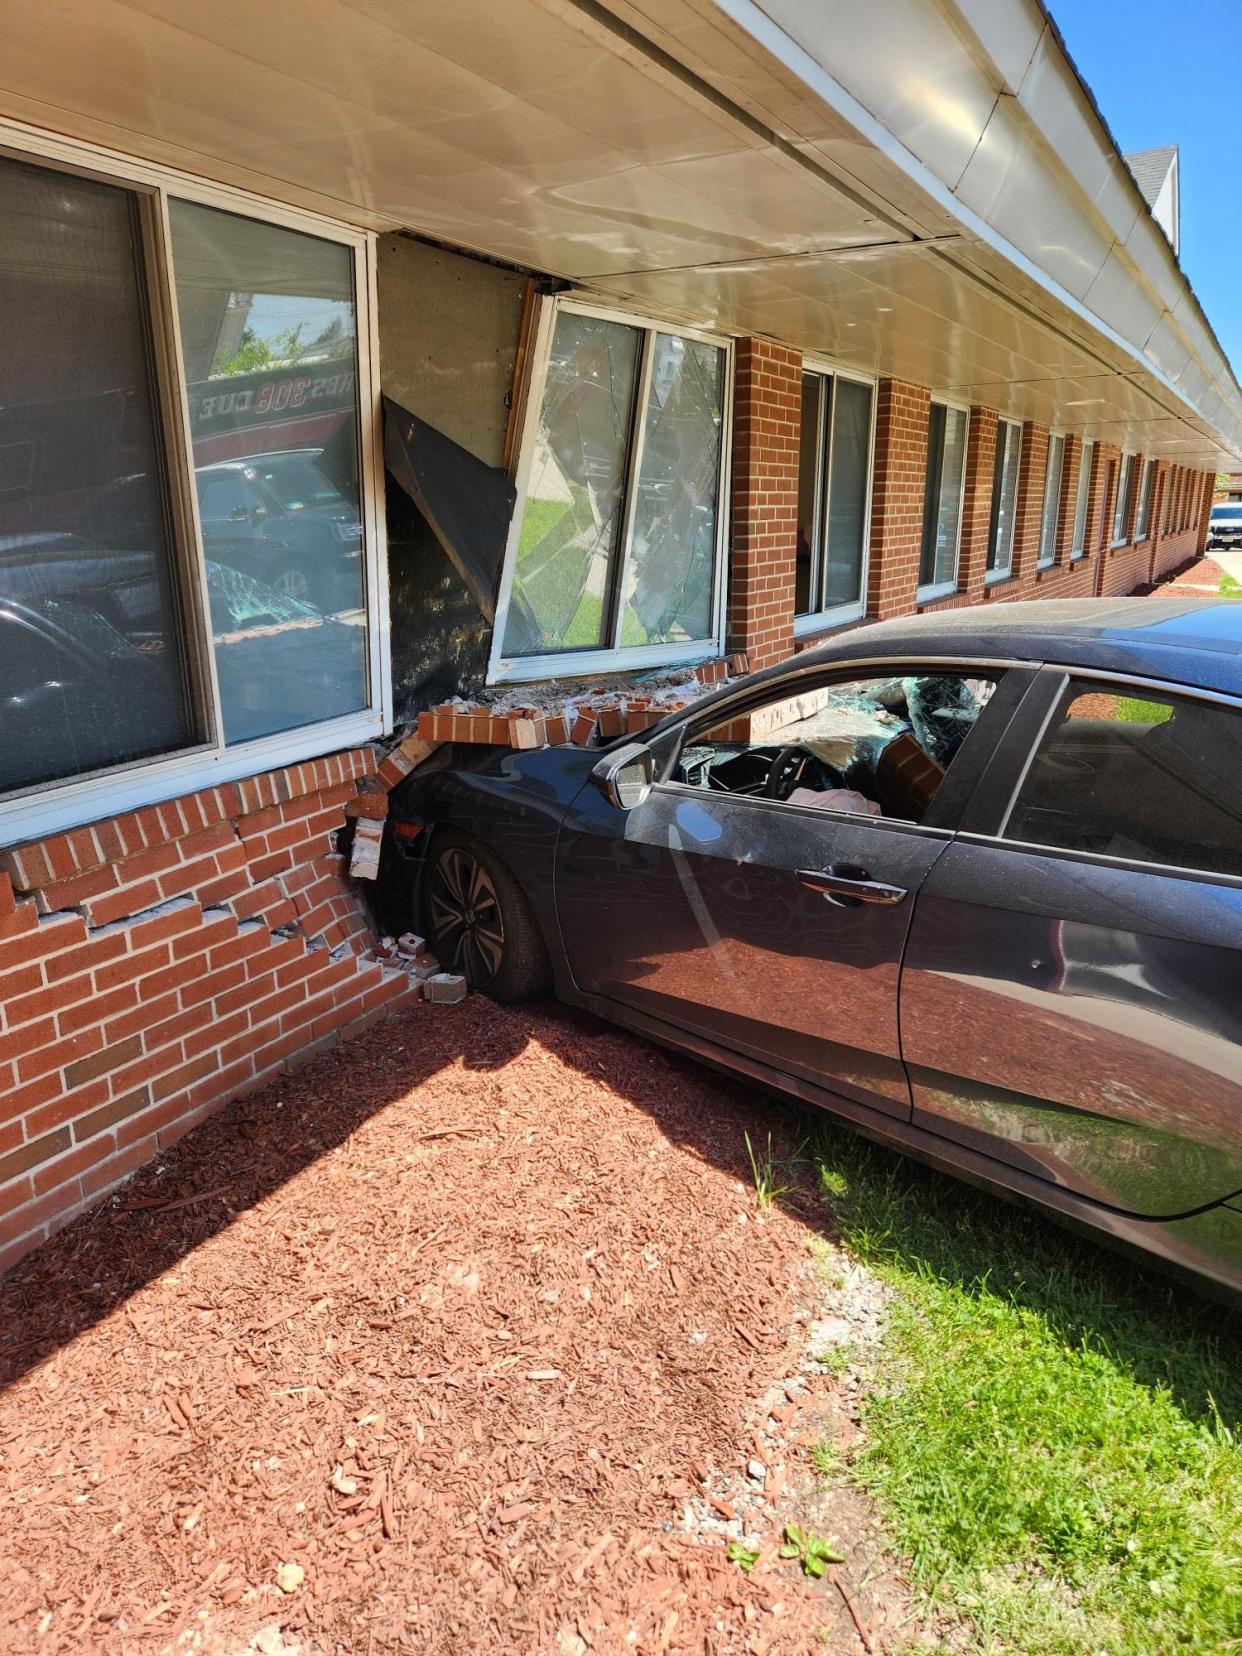 A 2017 Honda Civic slammed into the side of the New Jersey Expanding Capabilities Center in Little Ferry on Tuesday, May 7.